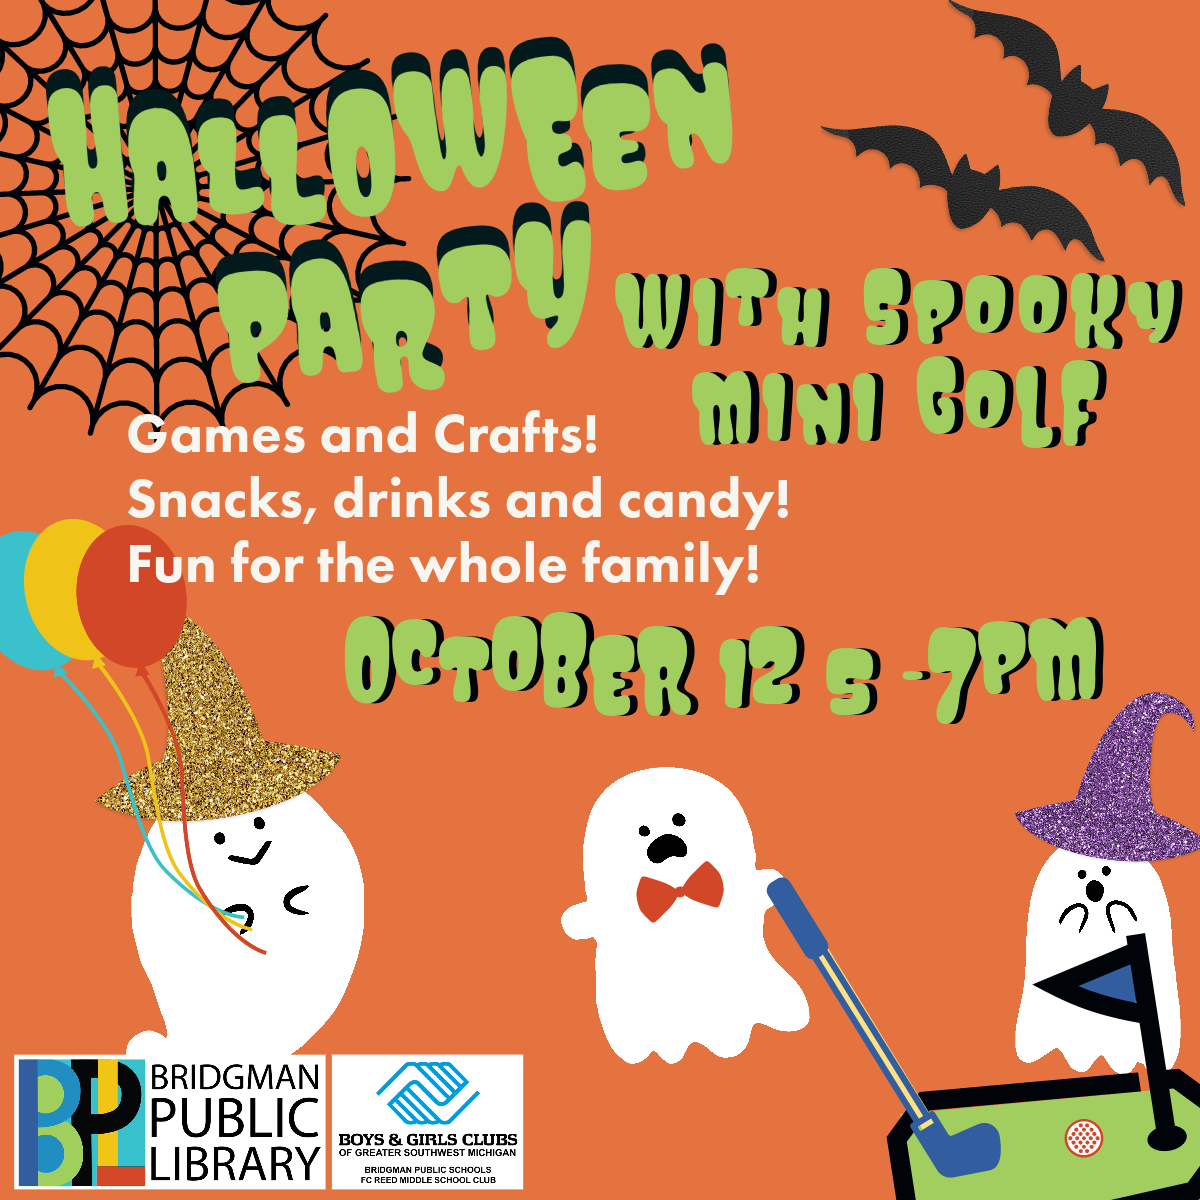 Halloween party is back, now with Spooky Mini Golf. Join us Thursday, October 12 from 5-7pm. Fun for the whole family.